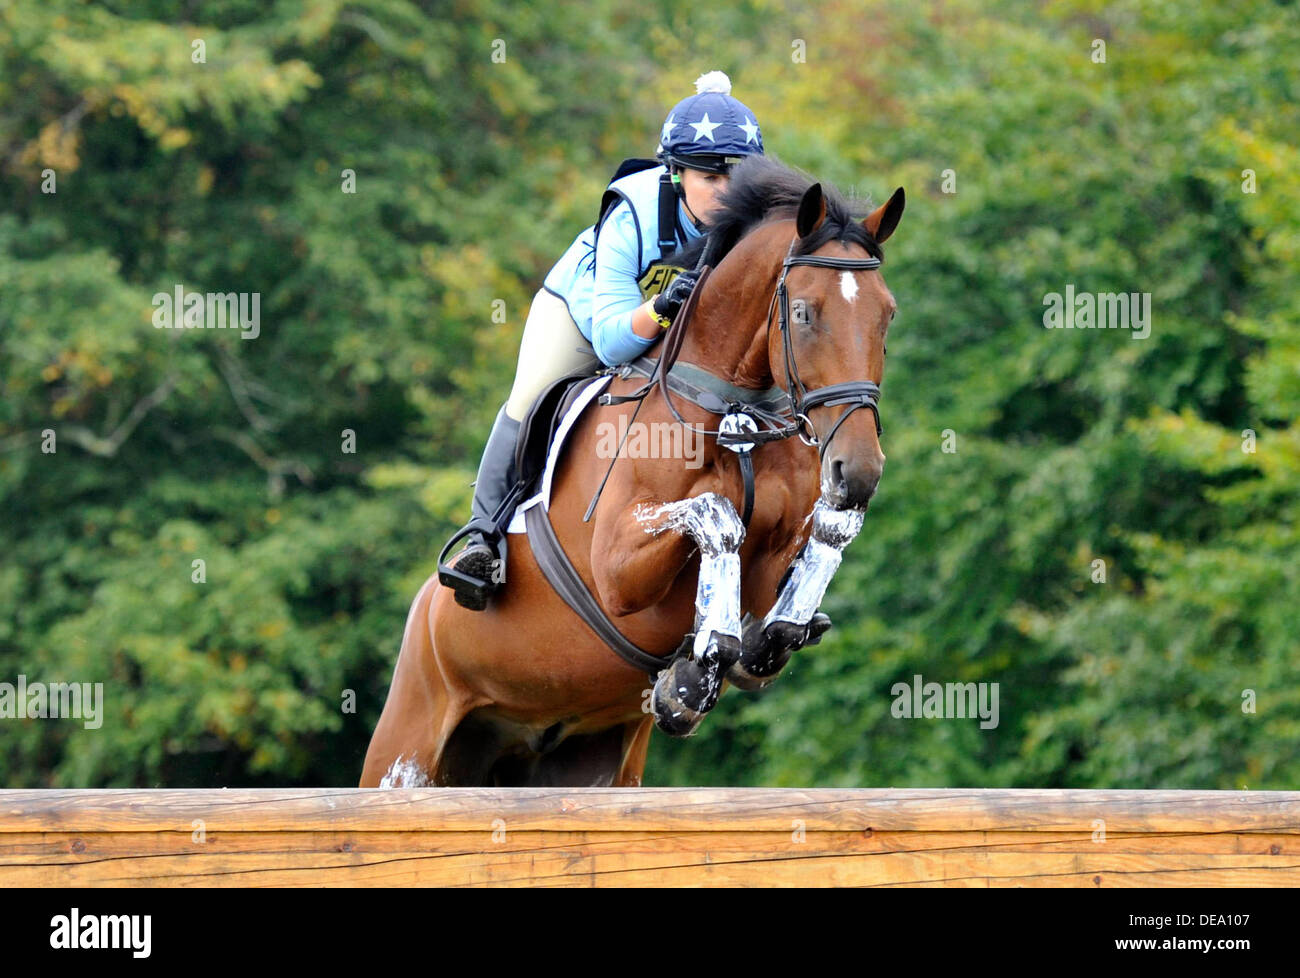 Woodstock Oxford, England, UK. Saturday 14th Sept, 2013. 2013 Fidelity Blenheim Palace Horse Trials. Alce Dunsdon (GBR) with Fernhill Present  during the Cross country phase of the CCI*** three day event Credit:  Julie Badrick/Alamy Live News Stock Photo